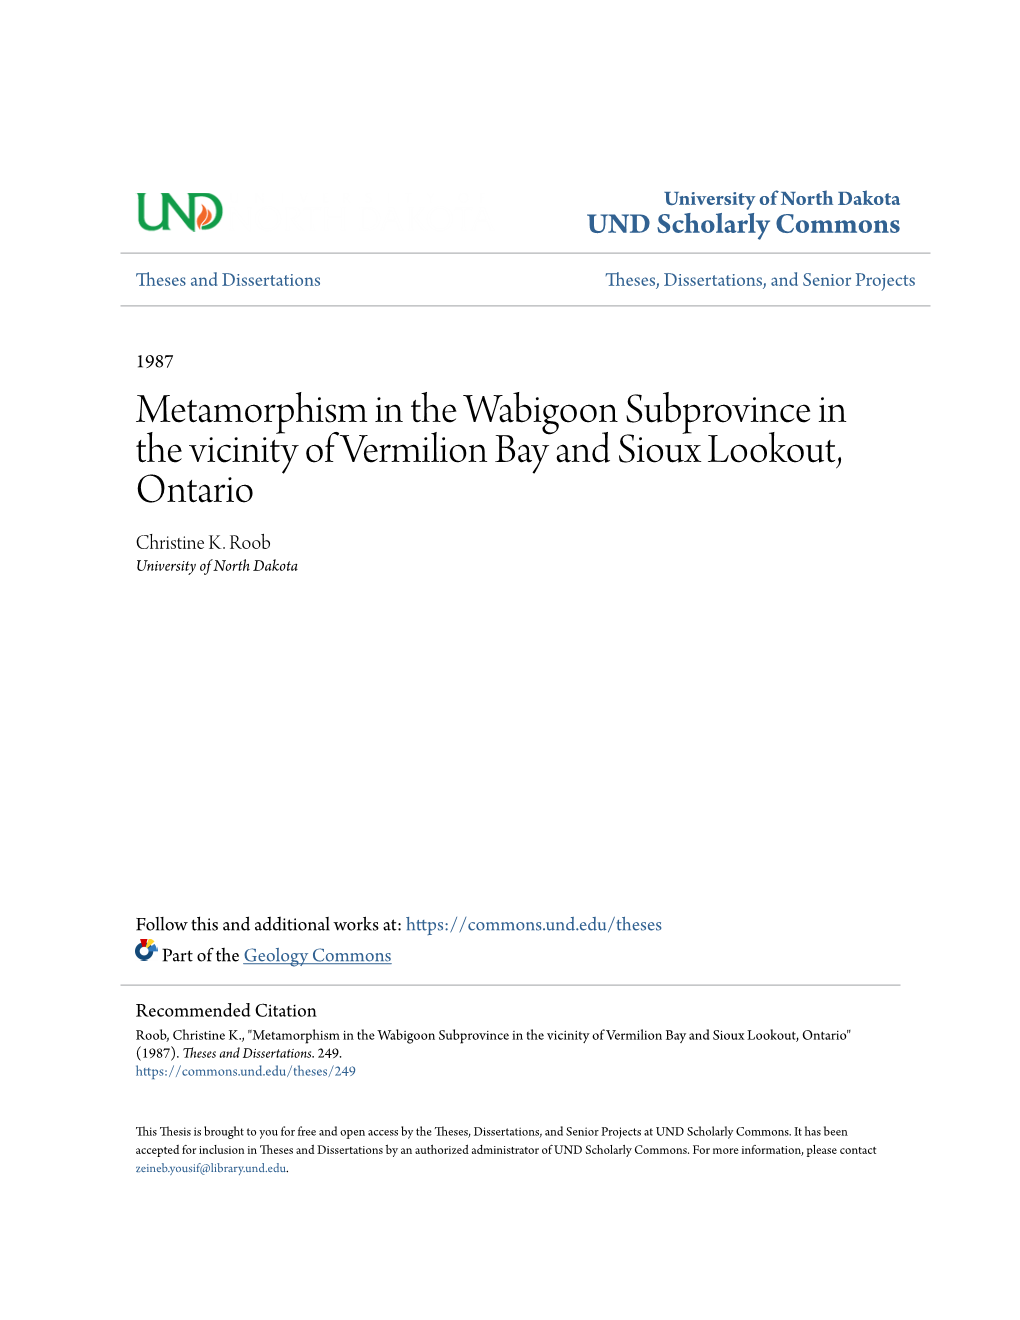 Metamorphism in the Wabigoon Subprovince in the Vicinity of Vermilion Bay and Sioux Lookout, Ontario Christine K